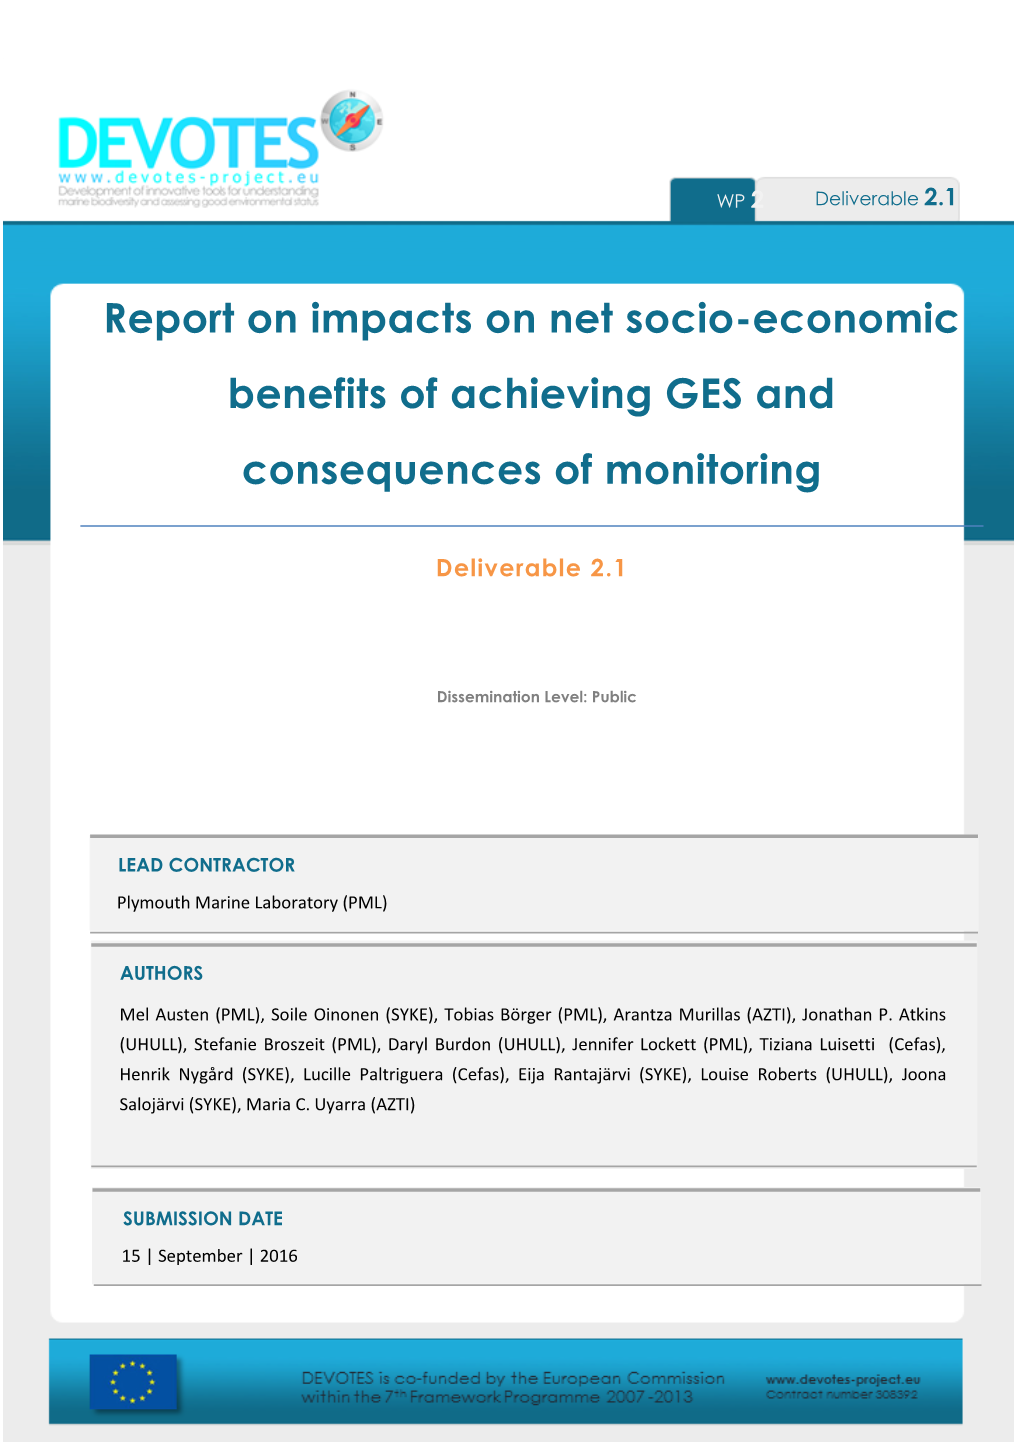 Report on Impacts on Net Socio-Economic Benefits of Achieving GES and Consequences of Monitoring